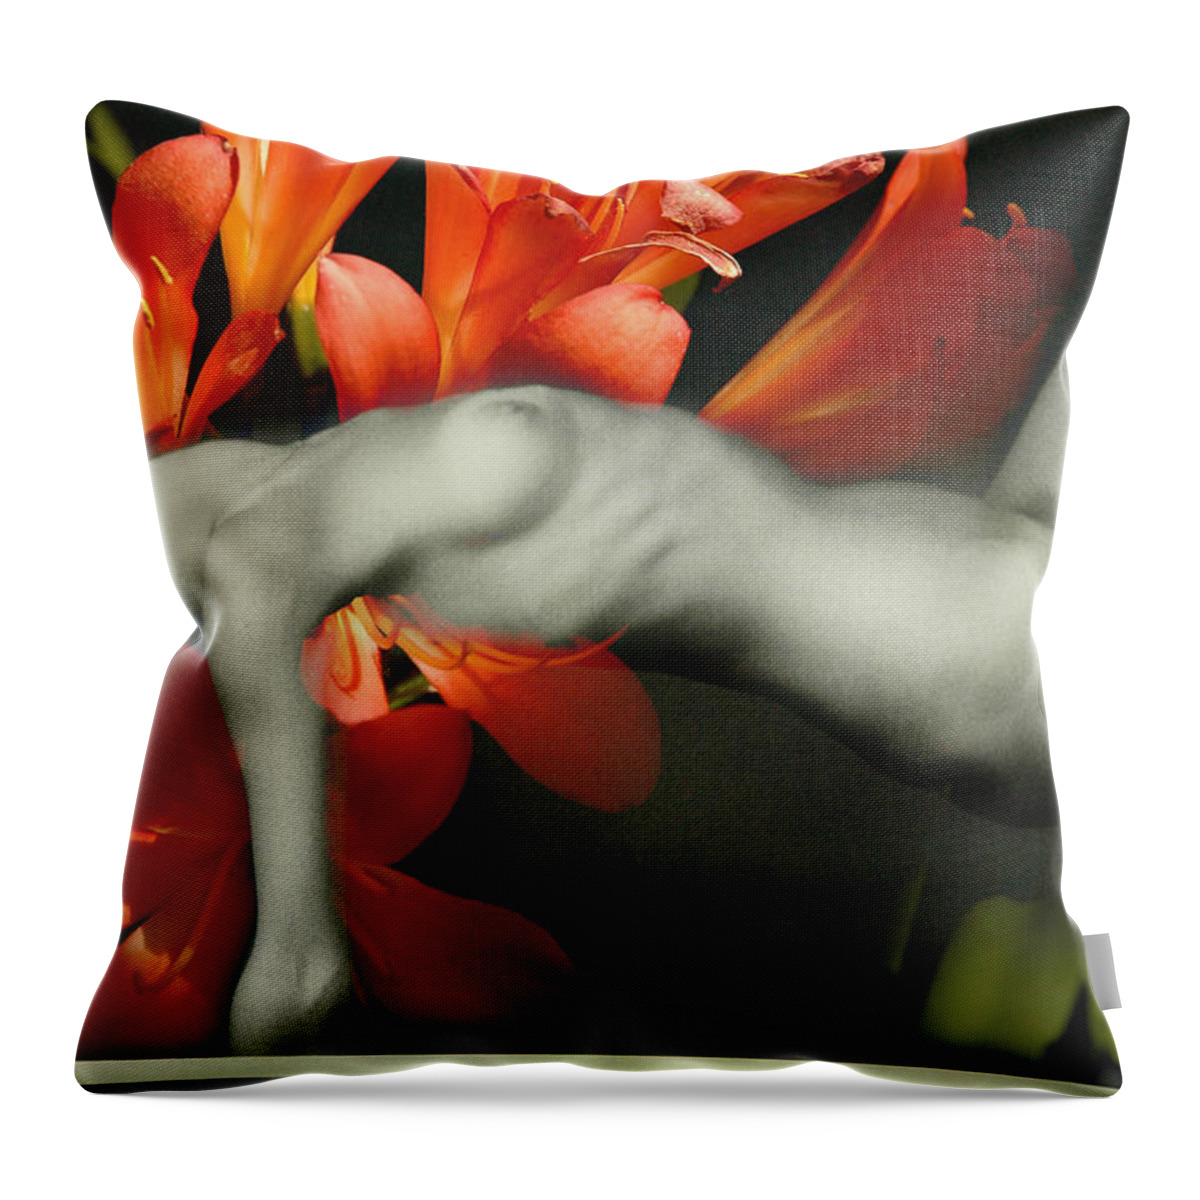 Full Nude Throw Pillow featuring the photograph Flower Girl by Harry Spitz